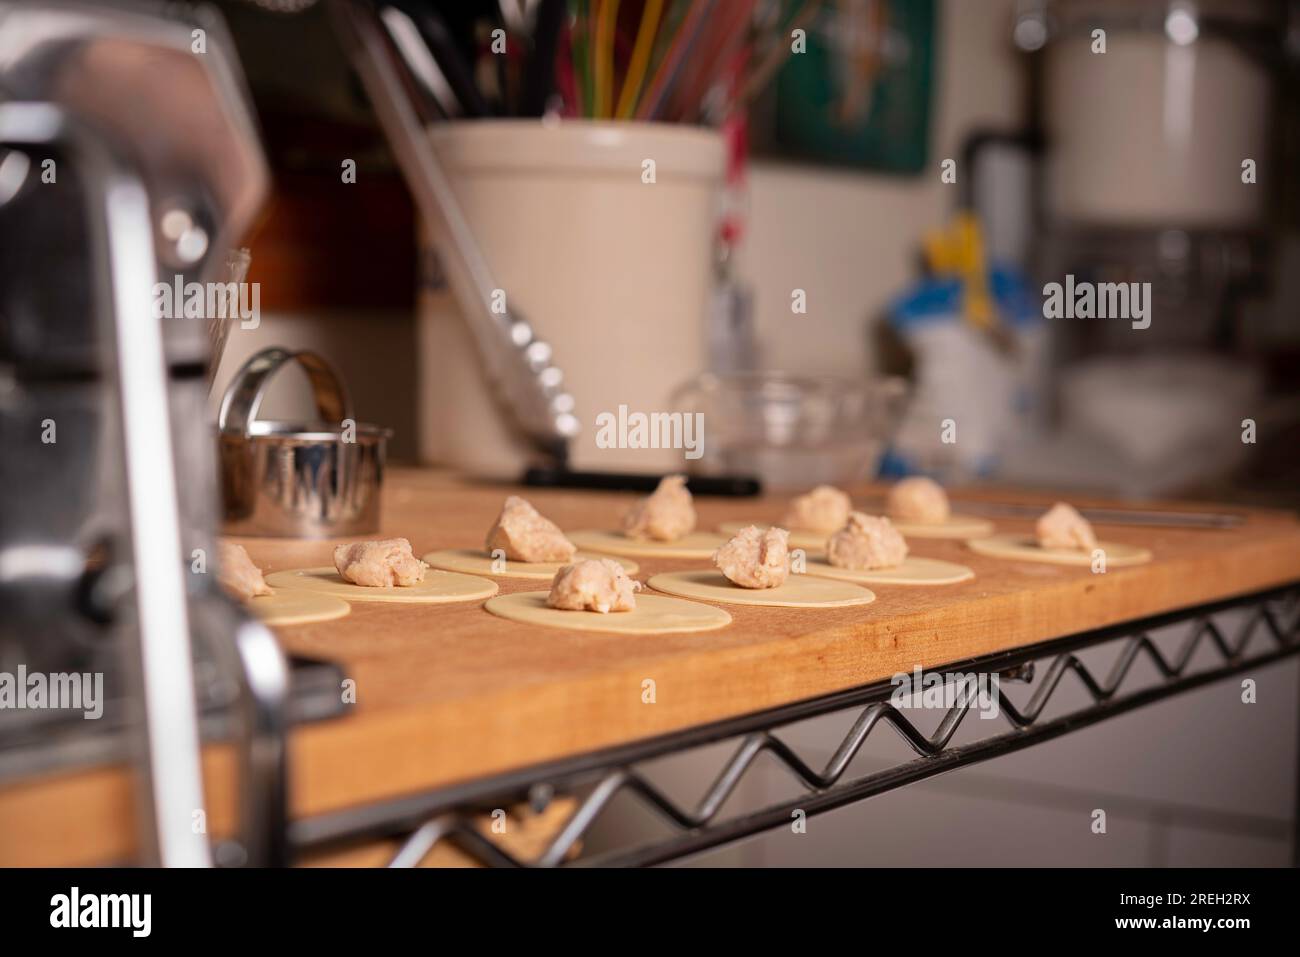 https://c8.alamy.com/comp/2REH2RX/making-pasta-and-tortellini-at-home-on-wooden-rack-and-chrome-pasta-maker-2REH2RX.jpg